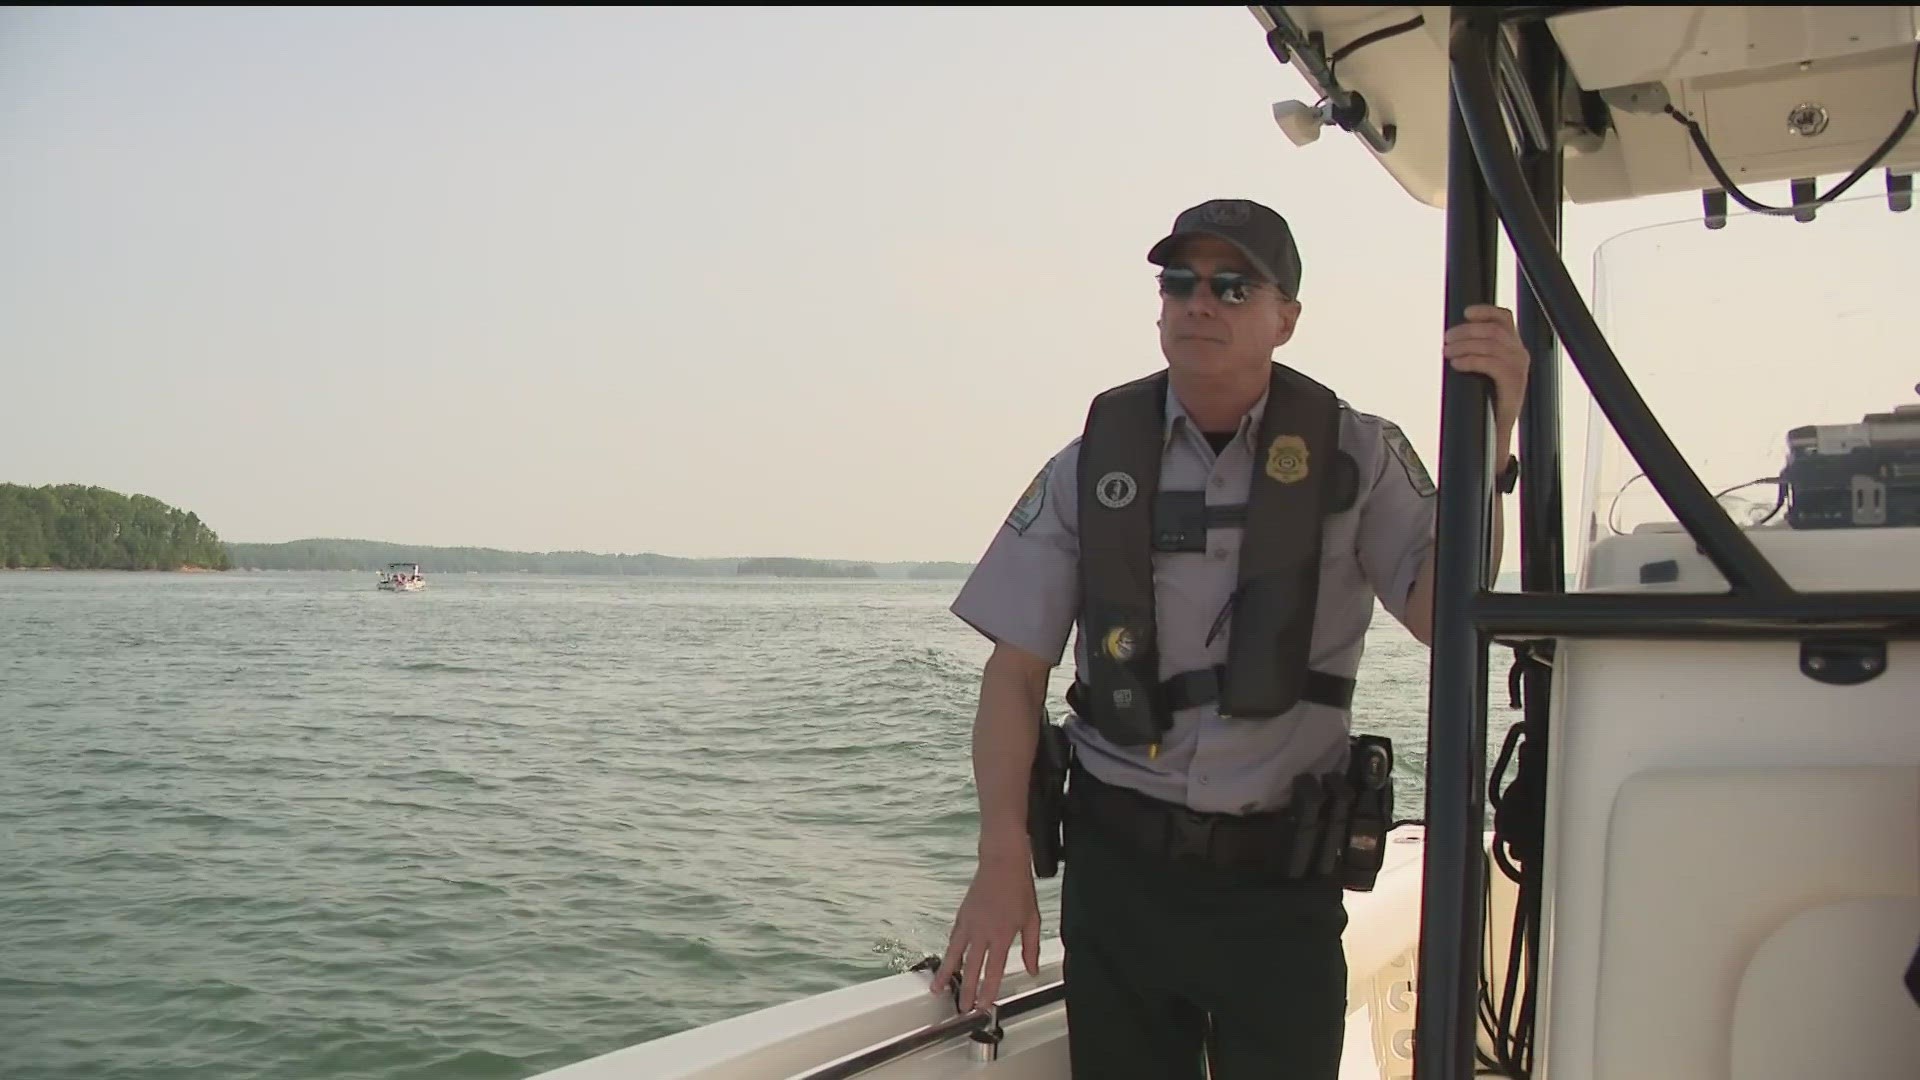 At least one person was also injured in a boating incident this weekend, the department said.